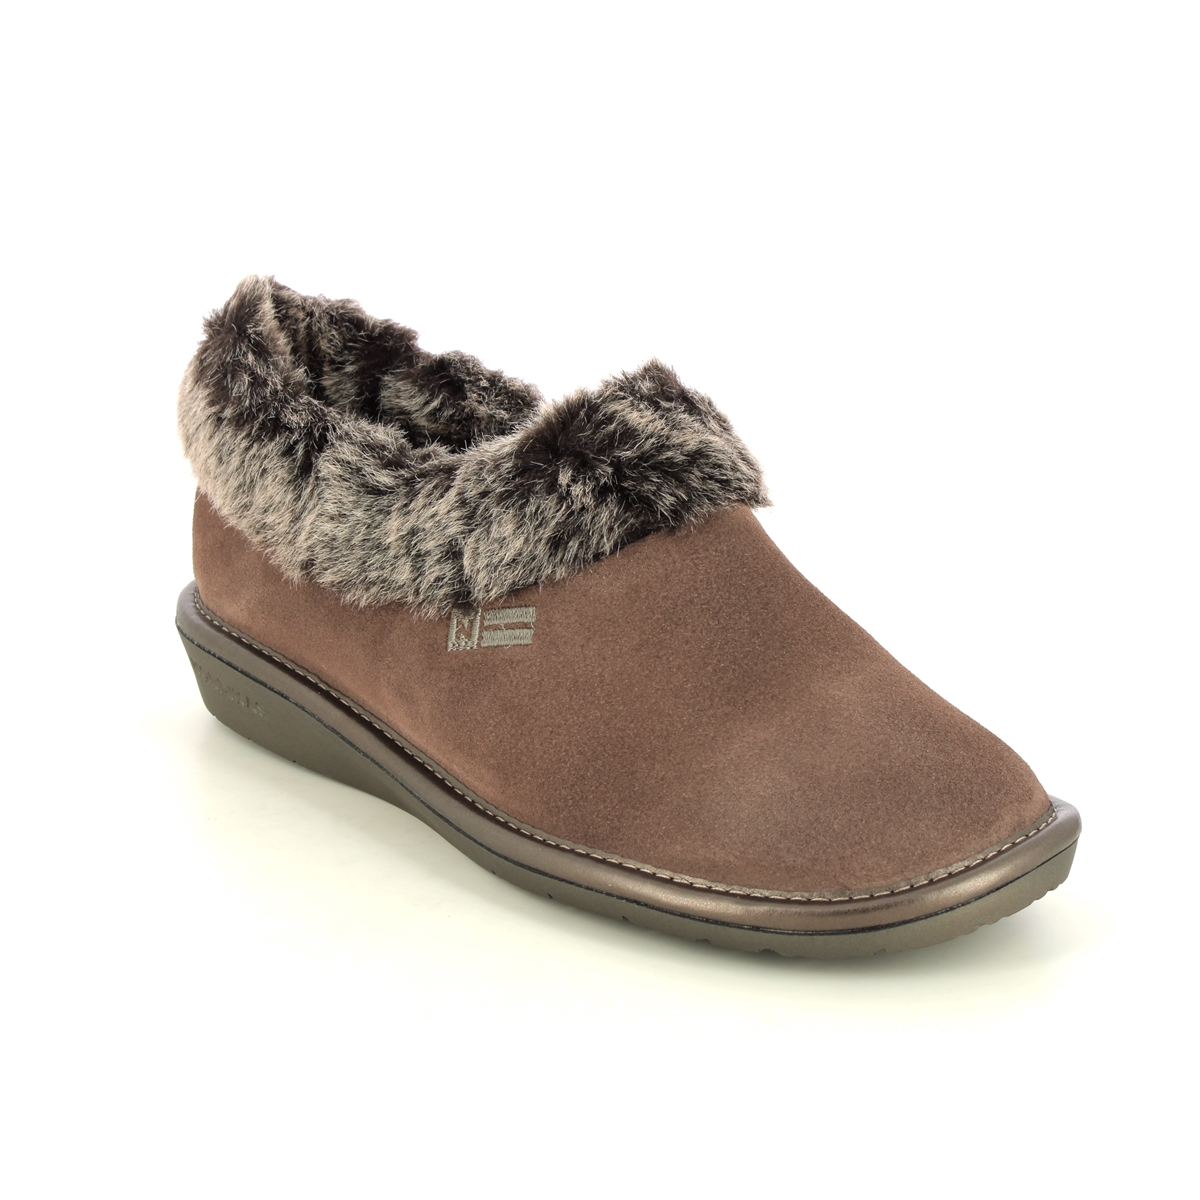 Nordikas Toasty Fur Taupe Suede Womens Slippers 1358-53 In Size 41 In Plain Taupe Suede